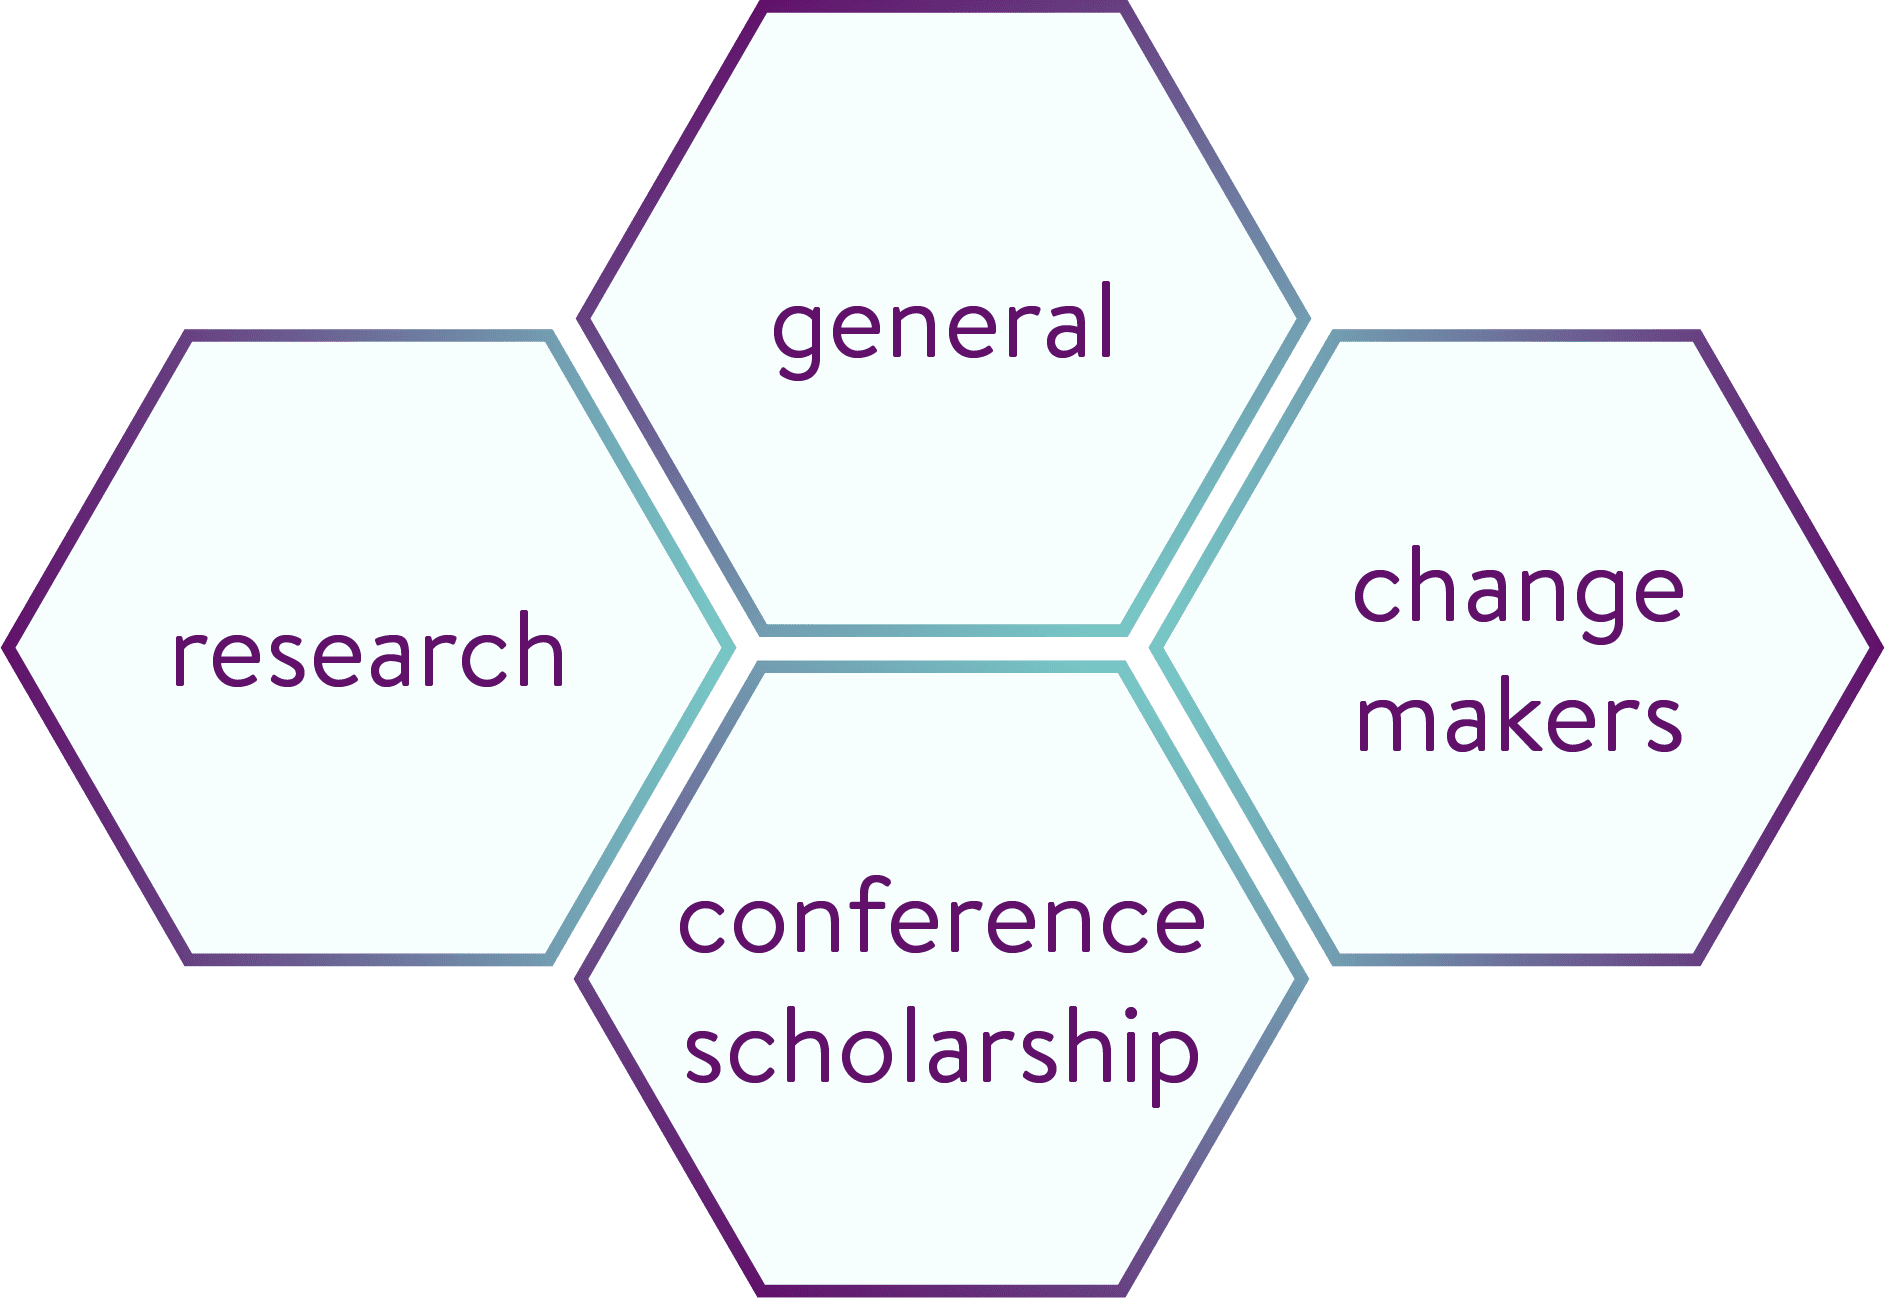 research, general, changemakers, conference scholarship